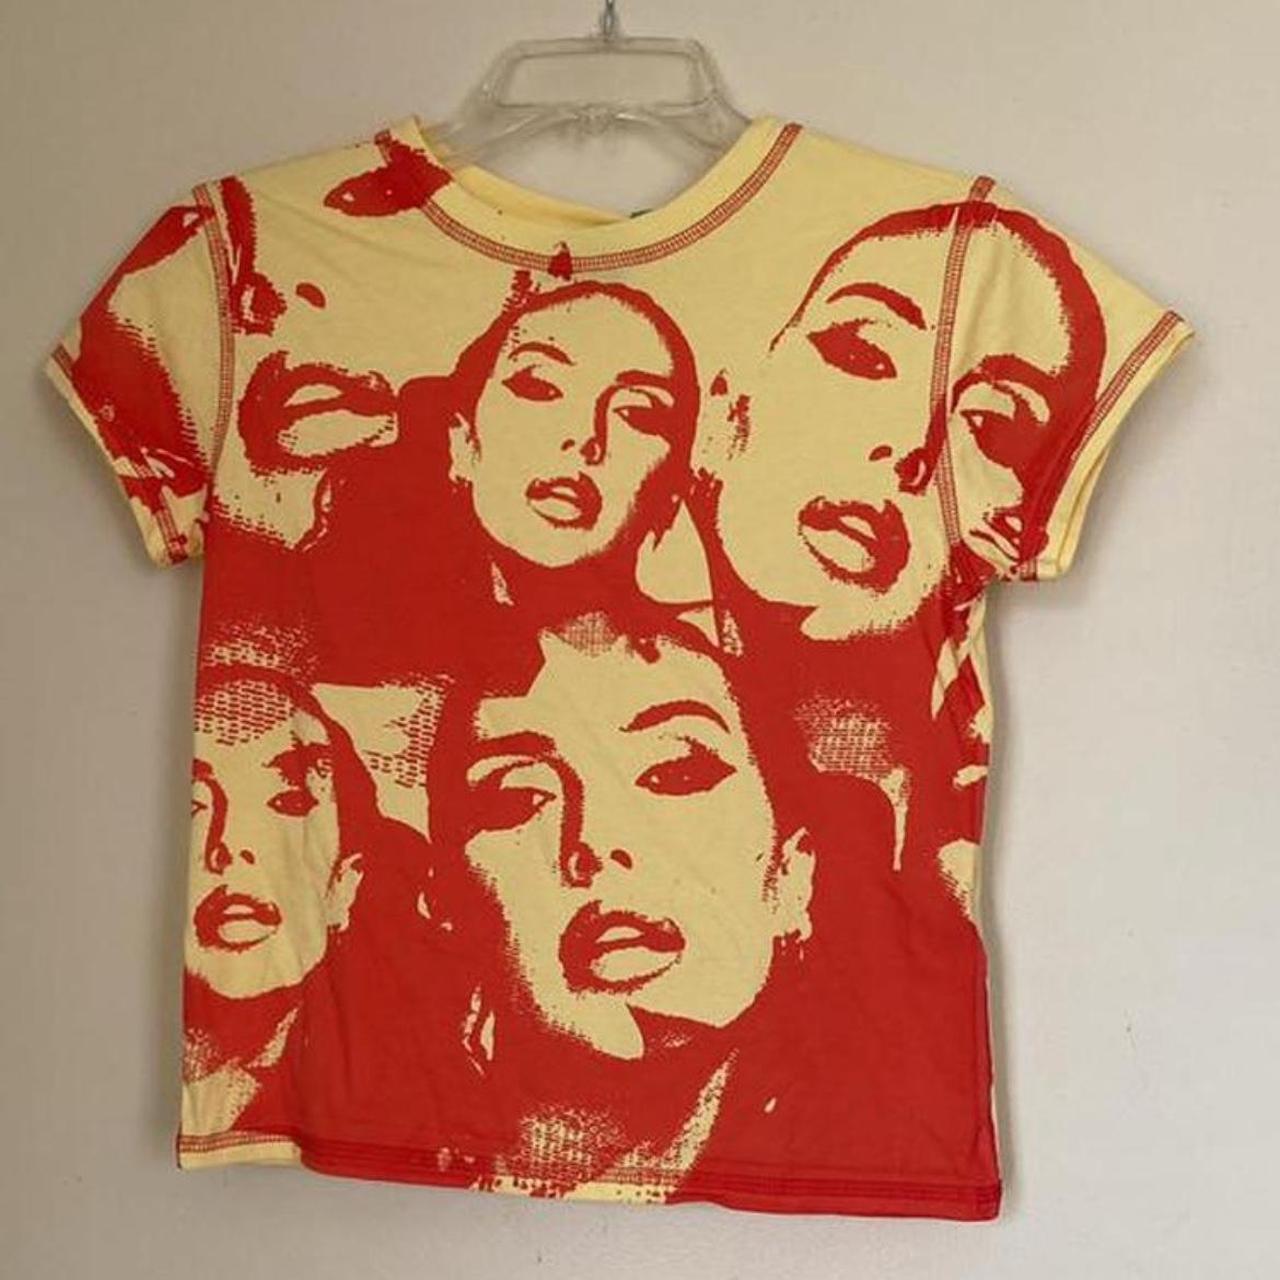 Jaded London Women's Yellow and Red Shirt | Depop